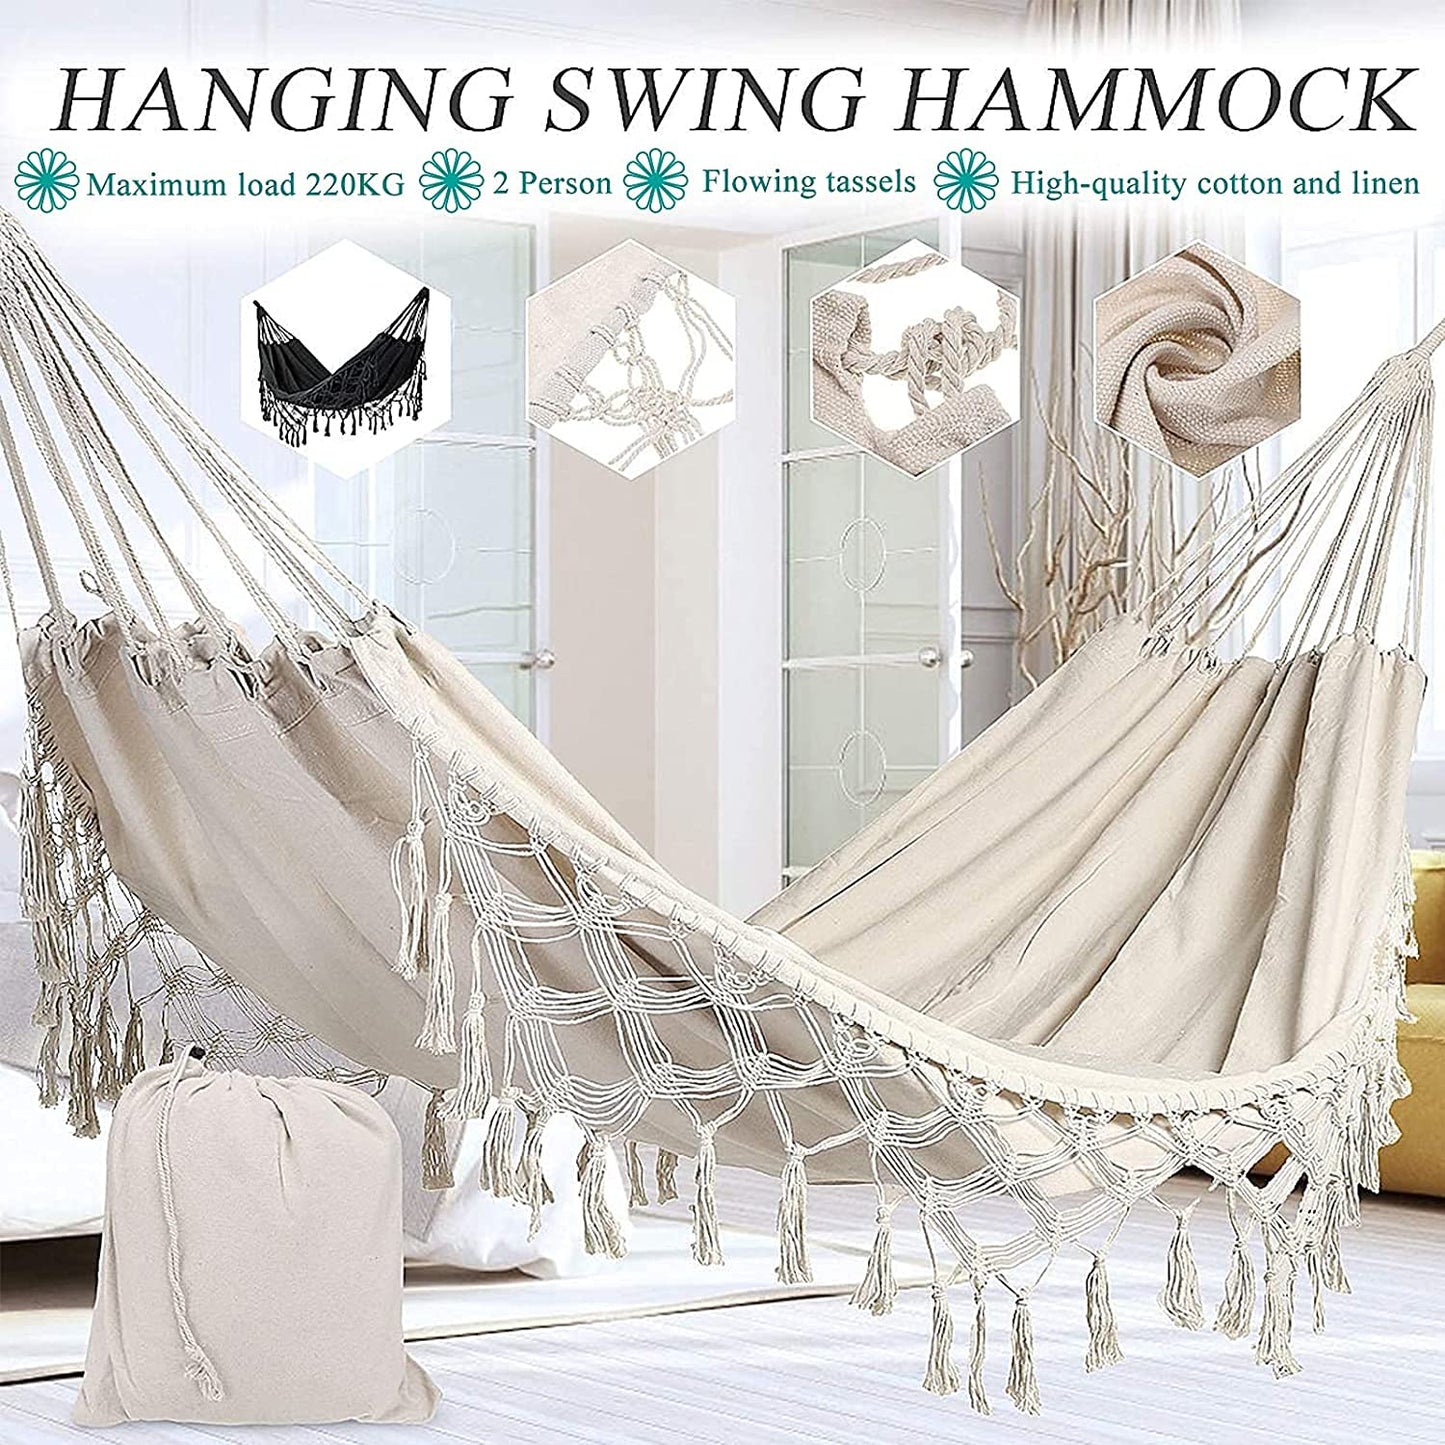 GT Double Deluxe Hammock Swing Hammock Garden Cotton Fabric Elegant Fringed,Double Deluxe Hammock Swing Net Chair with Tree Rope and Bag for Outdoor & Wedding Party Decor,White,240X150cm